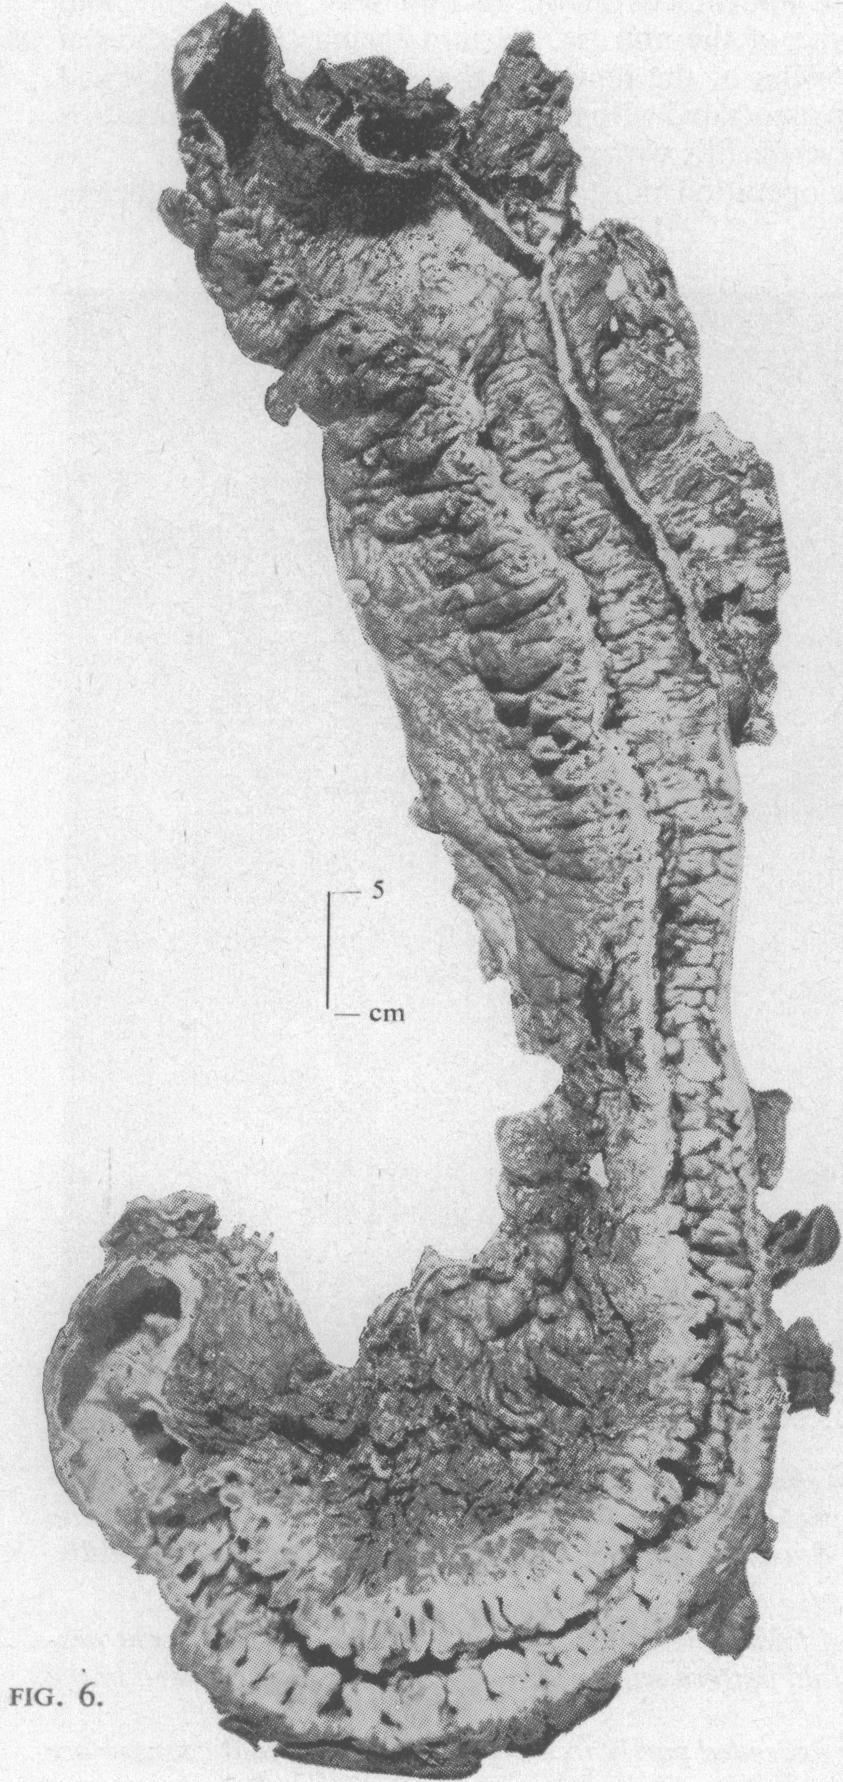 10 G. T. Schmidt, J. E. Lennard-Jones, B. C. Morson, and A. C. Young volved by an inflammatory process causing marked thickening of the bowel wall with oedema of the mesentery.